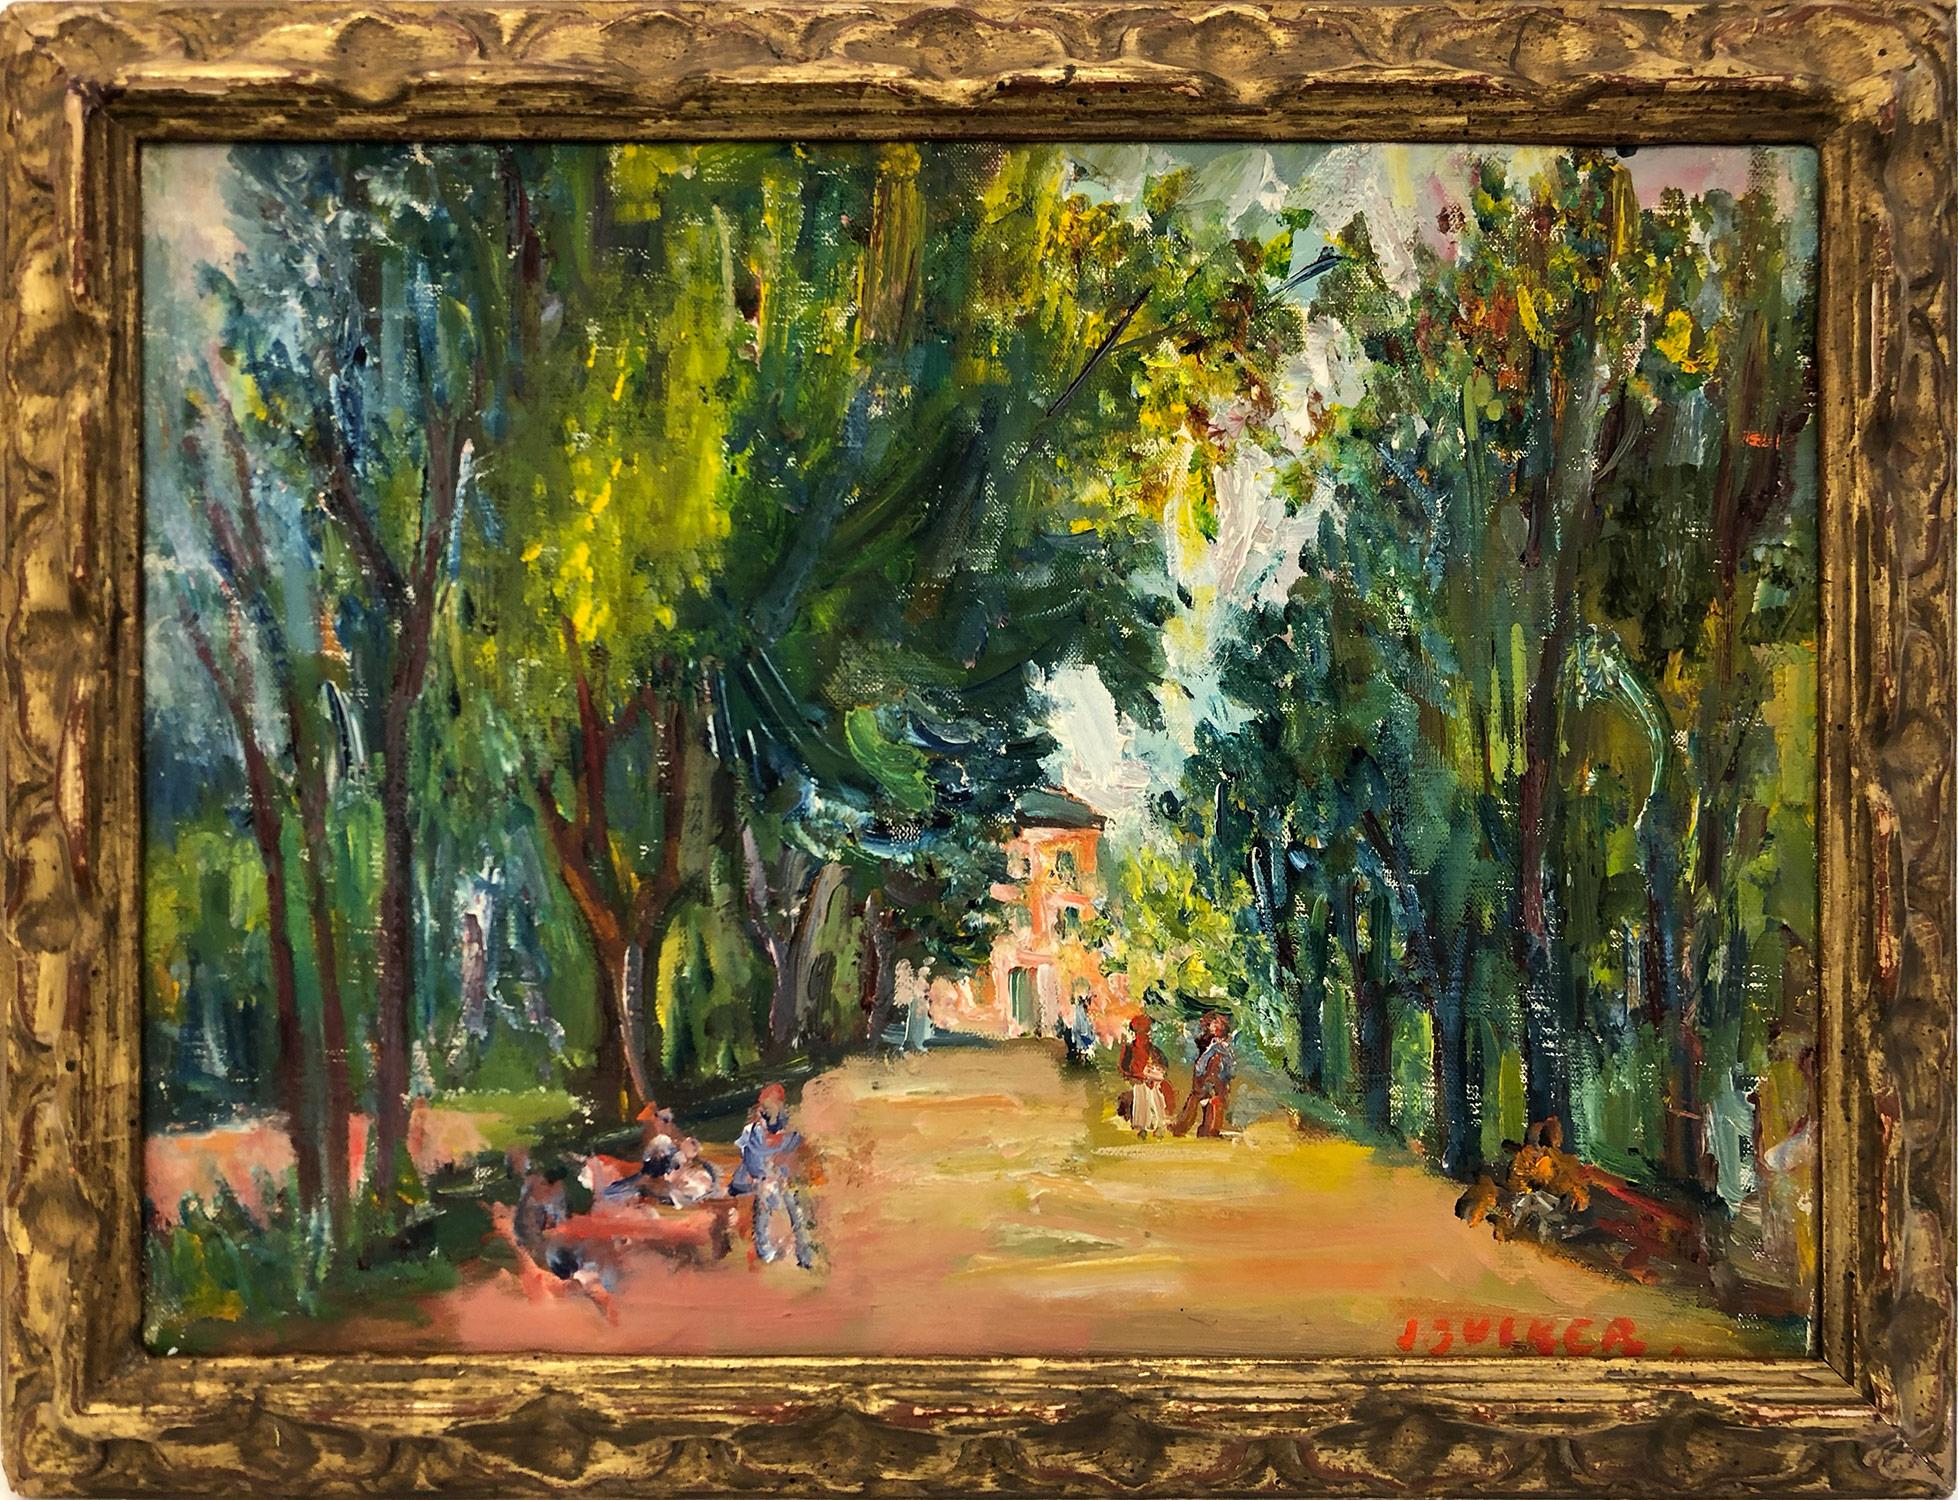 Jacques Zucker Landscape Painting - "Park Scene" Landscape Post-Impressionism Oil Painting with Figures and Trees